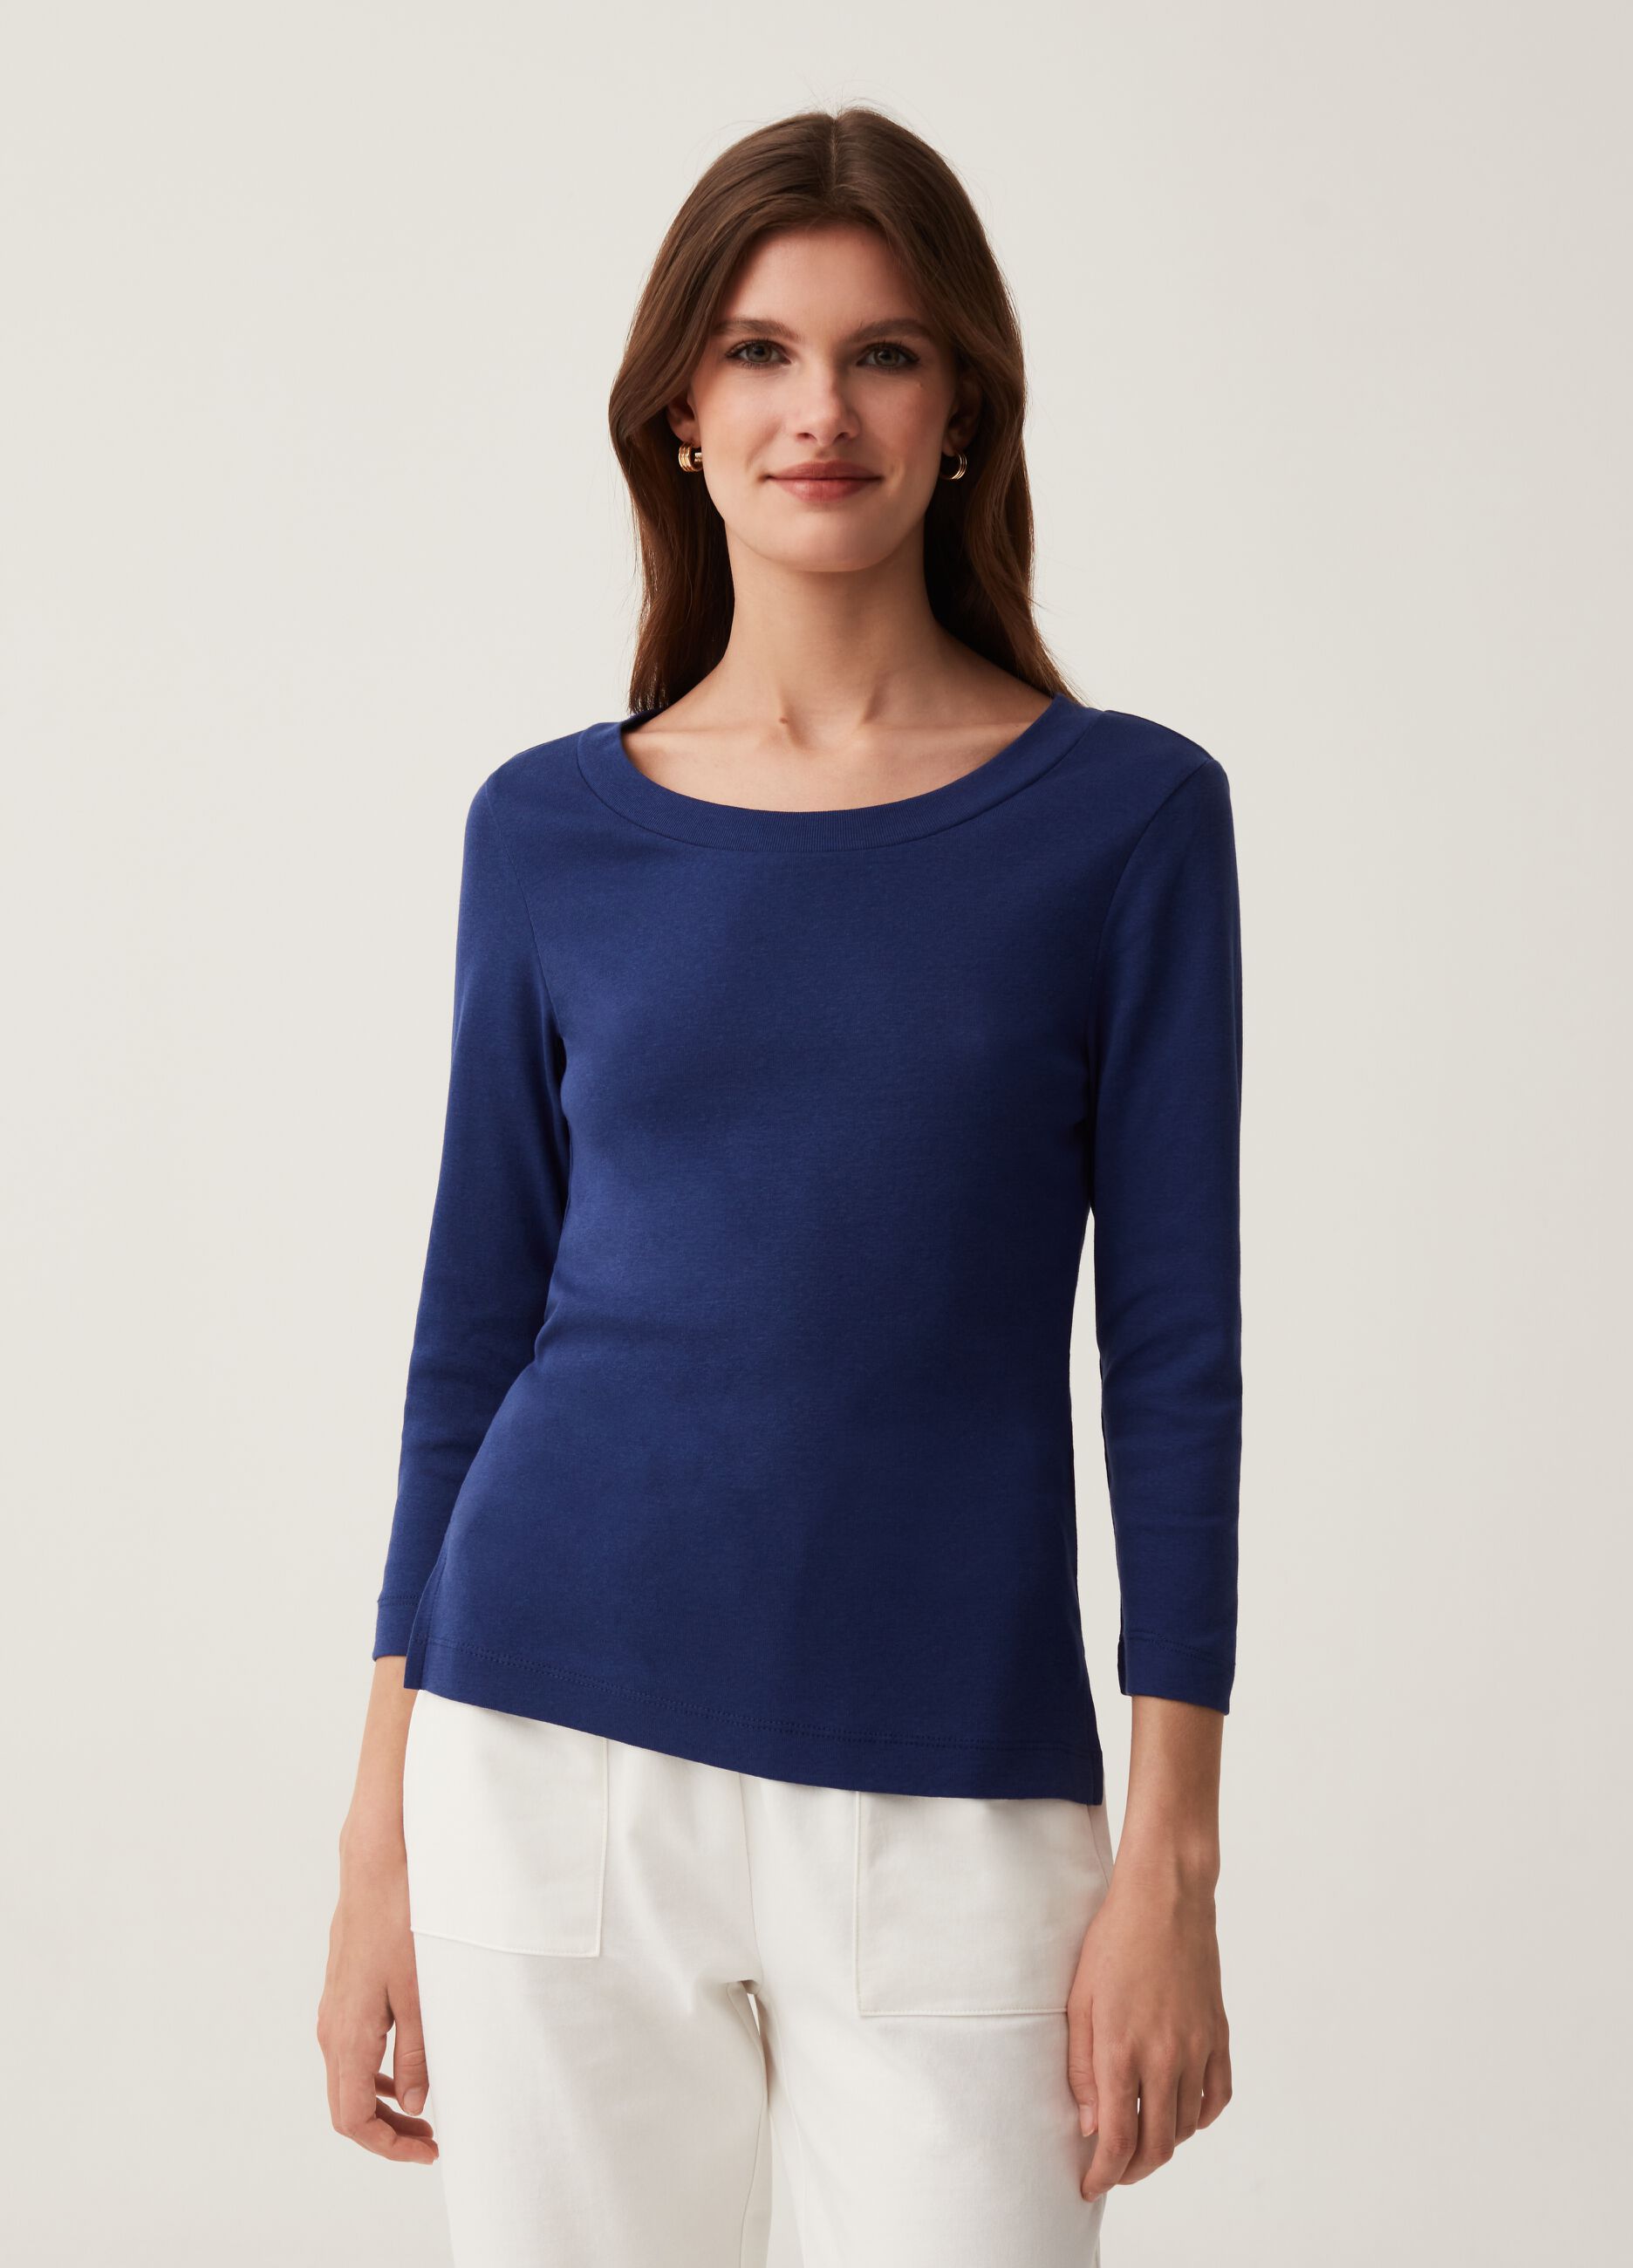 Cotton T-shirt with three-quarter sleeves